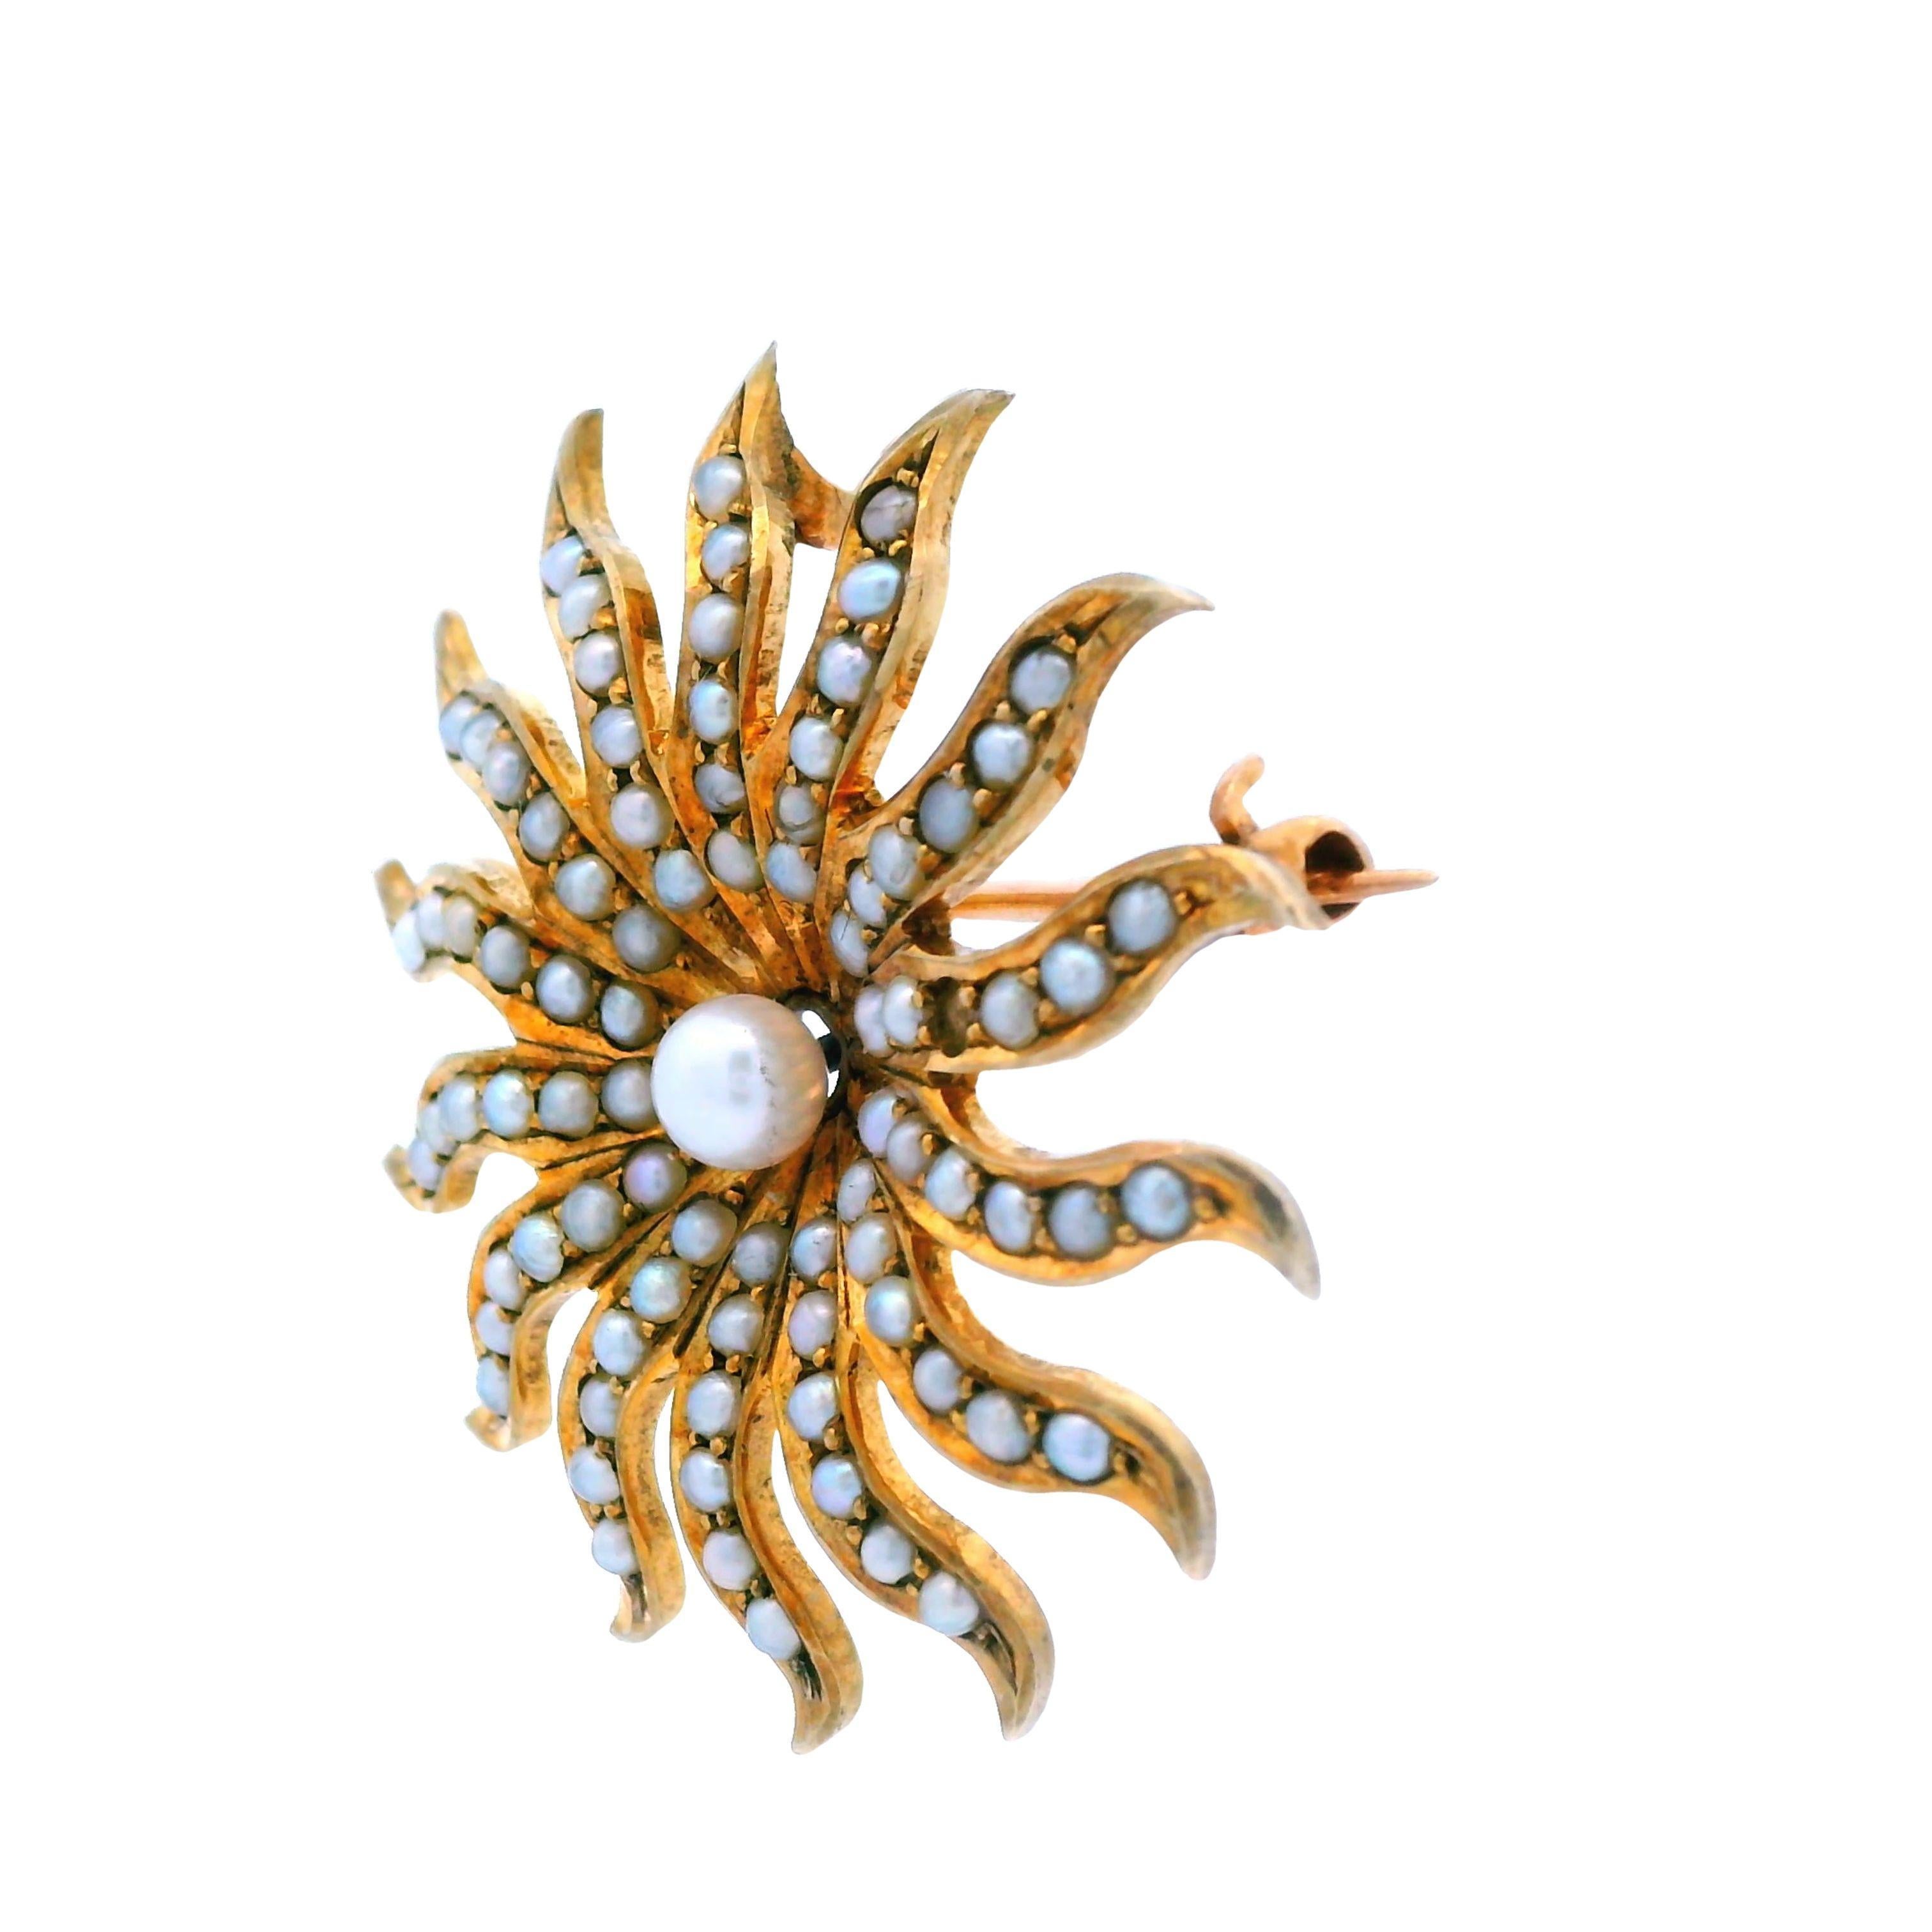 This pin comes from the 1890s Victorian era and is made in 10k yellow gold with pearl. Each ray from the sun burst contains approximately six individual pearls, creating exceptional details and sun-like effects when met with different types of